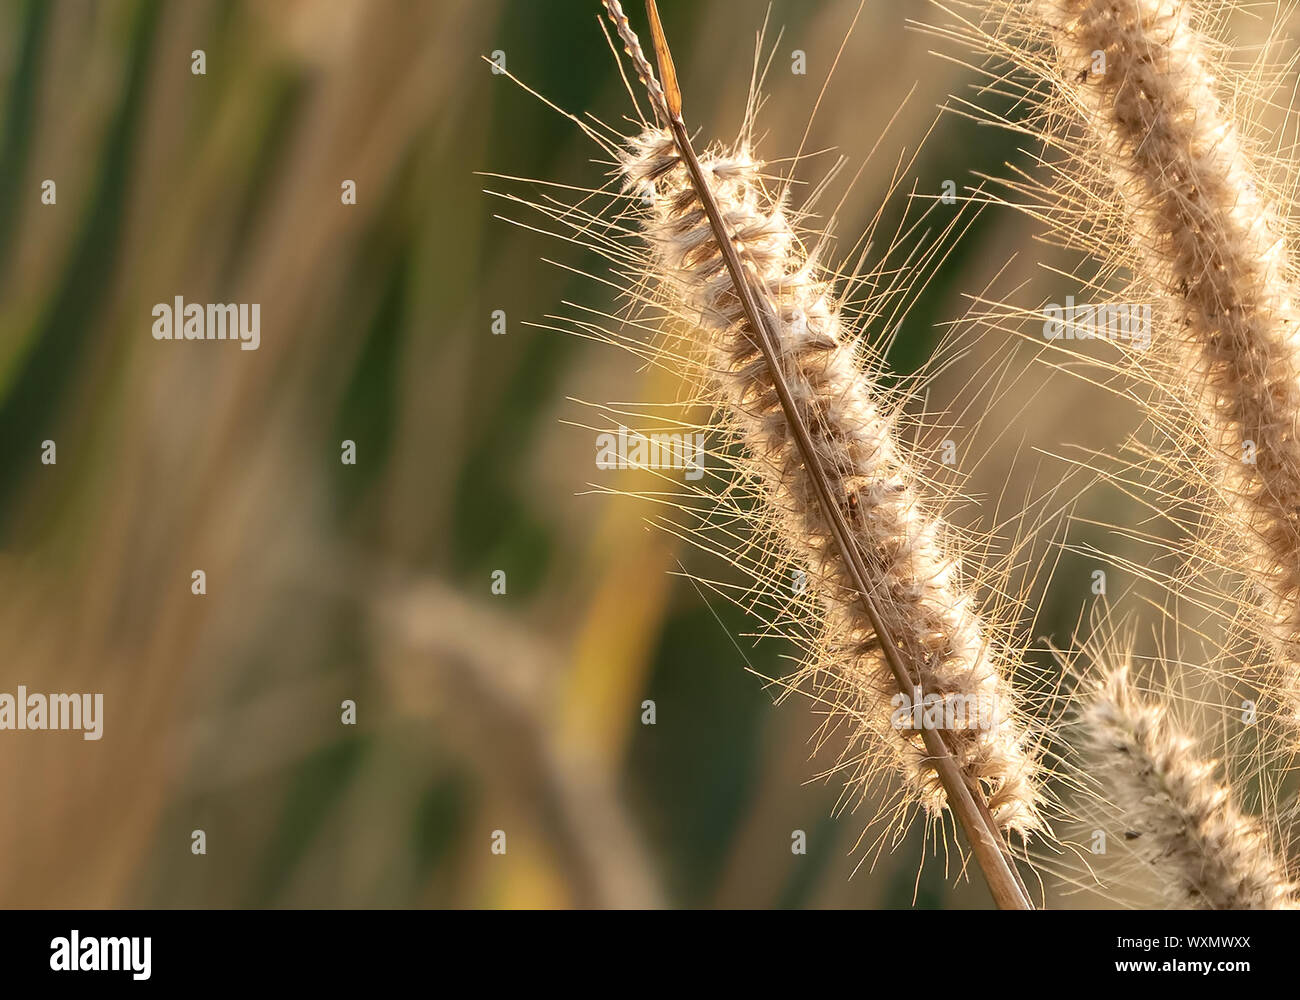 Closeup Poaceae Grass Flower with Sunlight Isolated on Nature Background Stock Photo